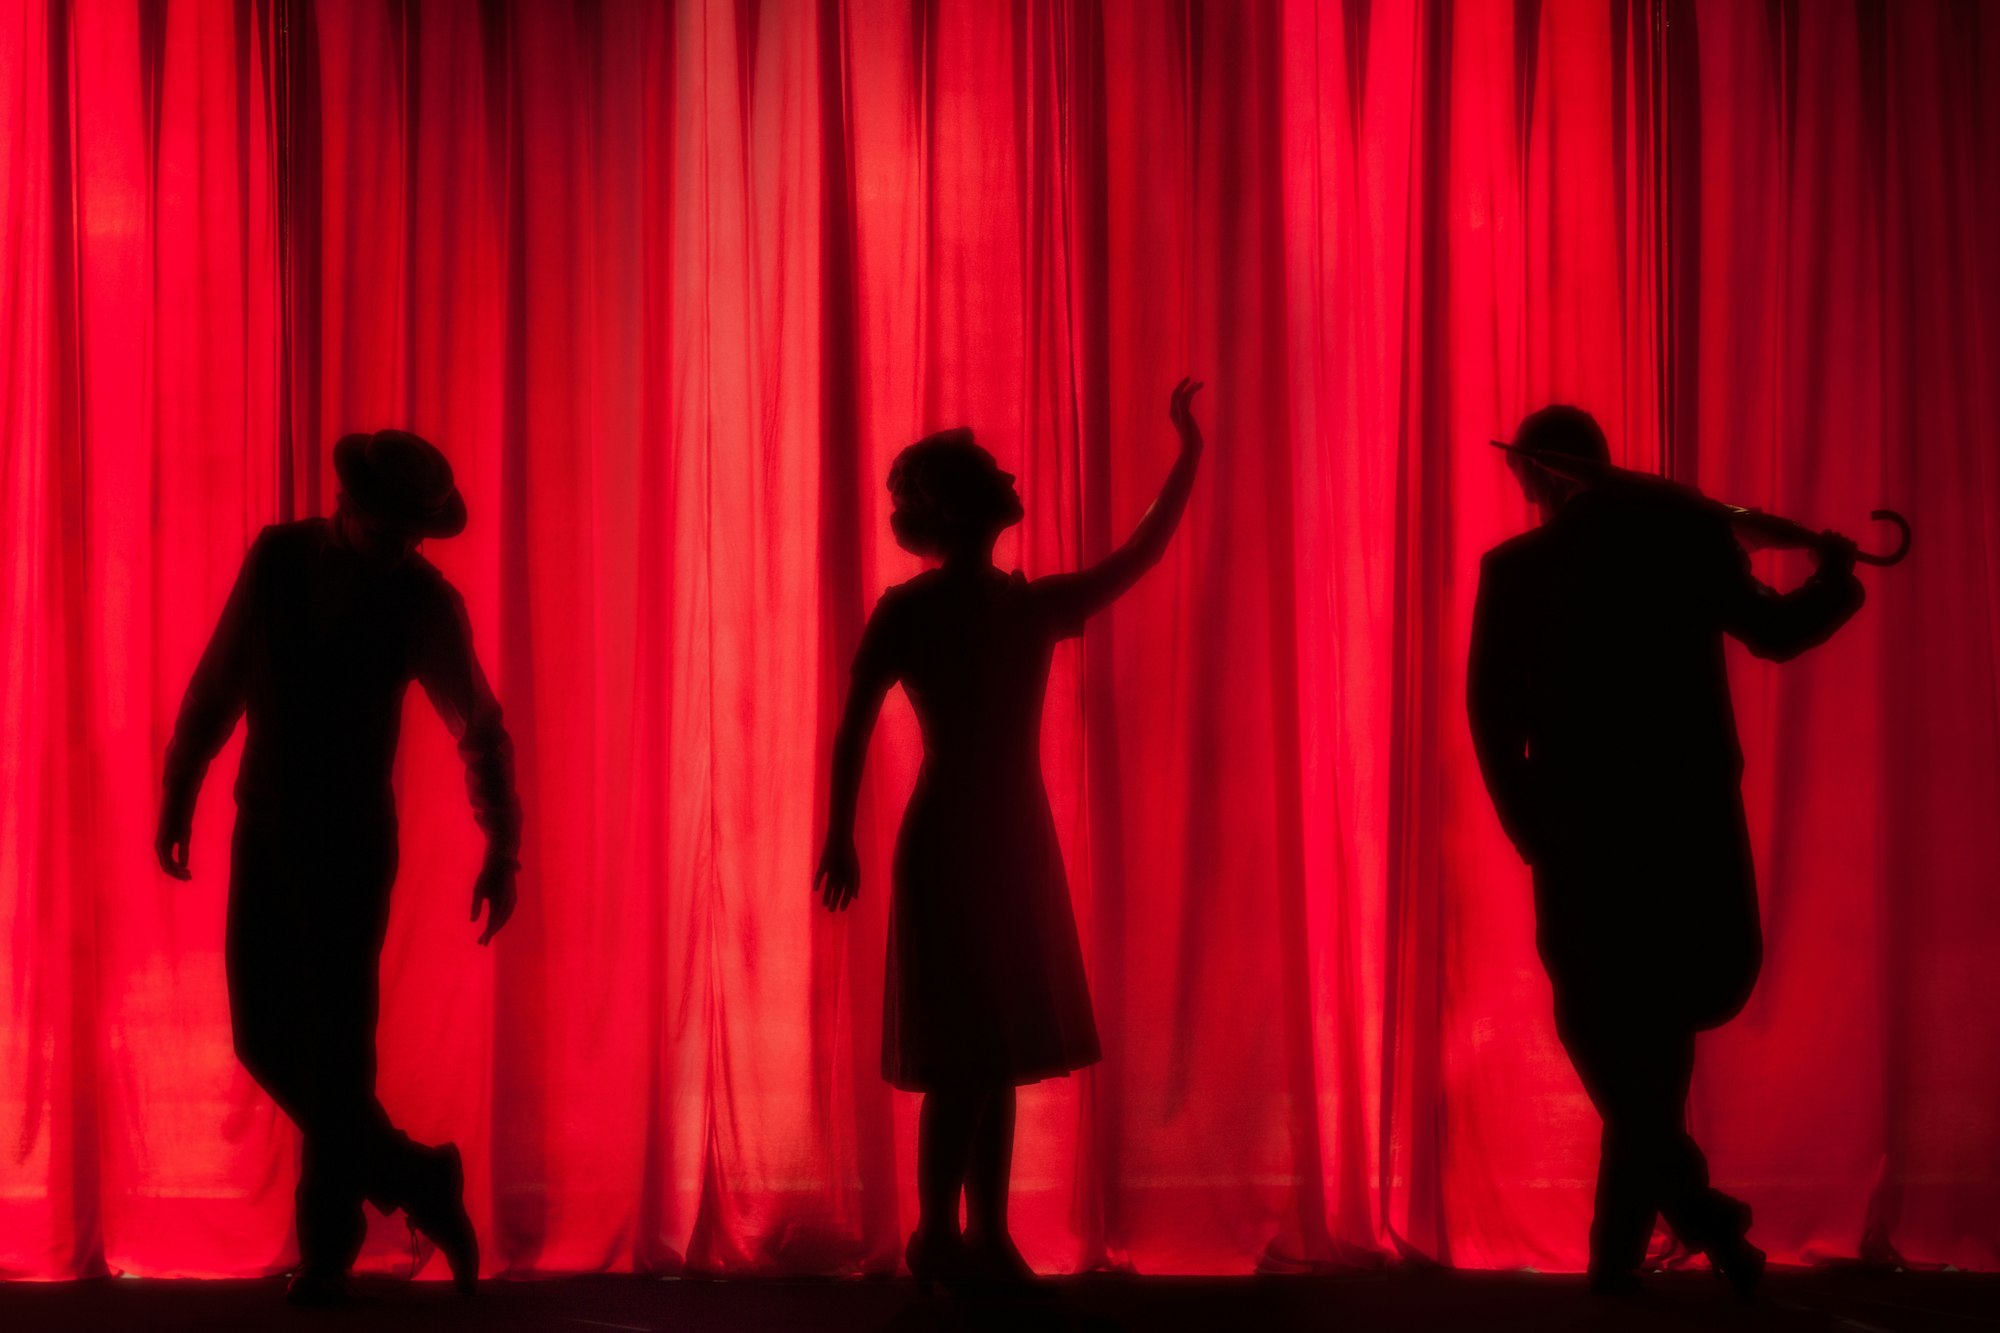 The silhouettes of 3 people acting in front of a red curtain